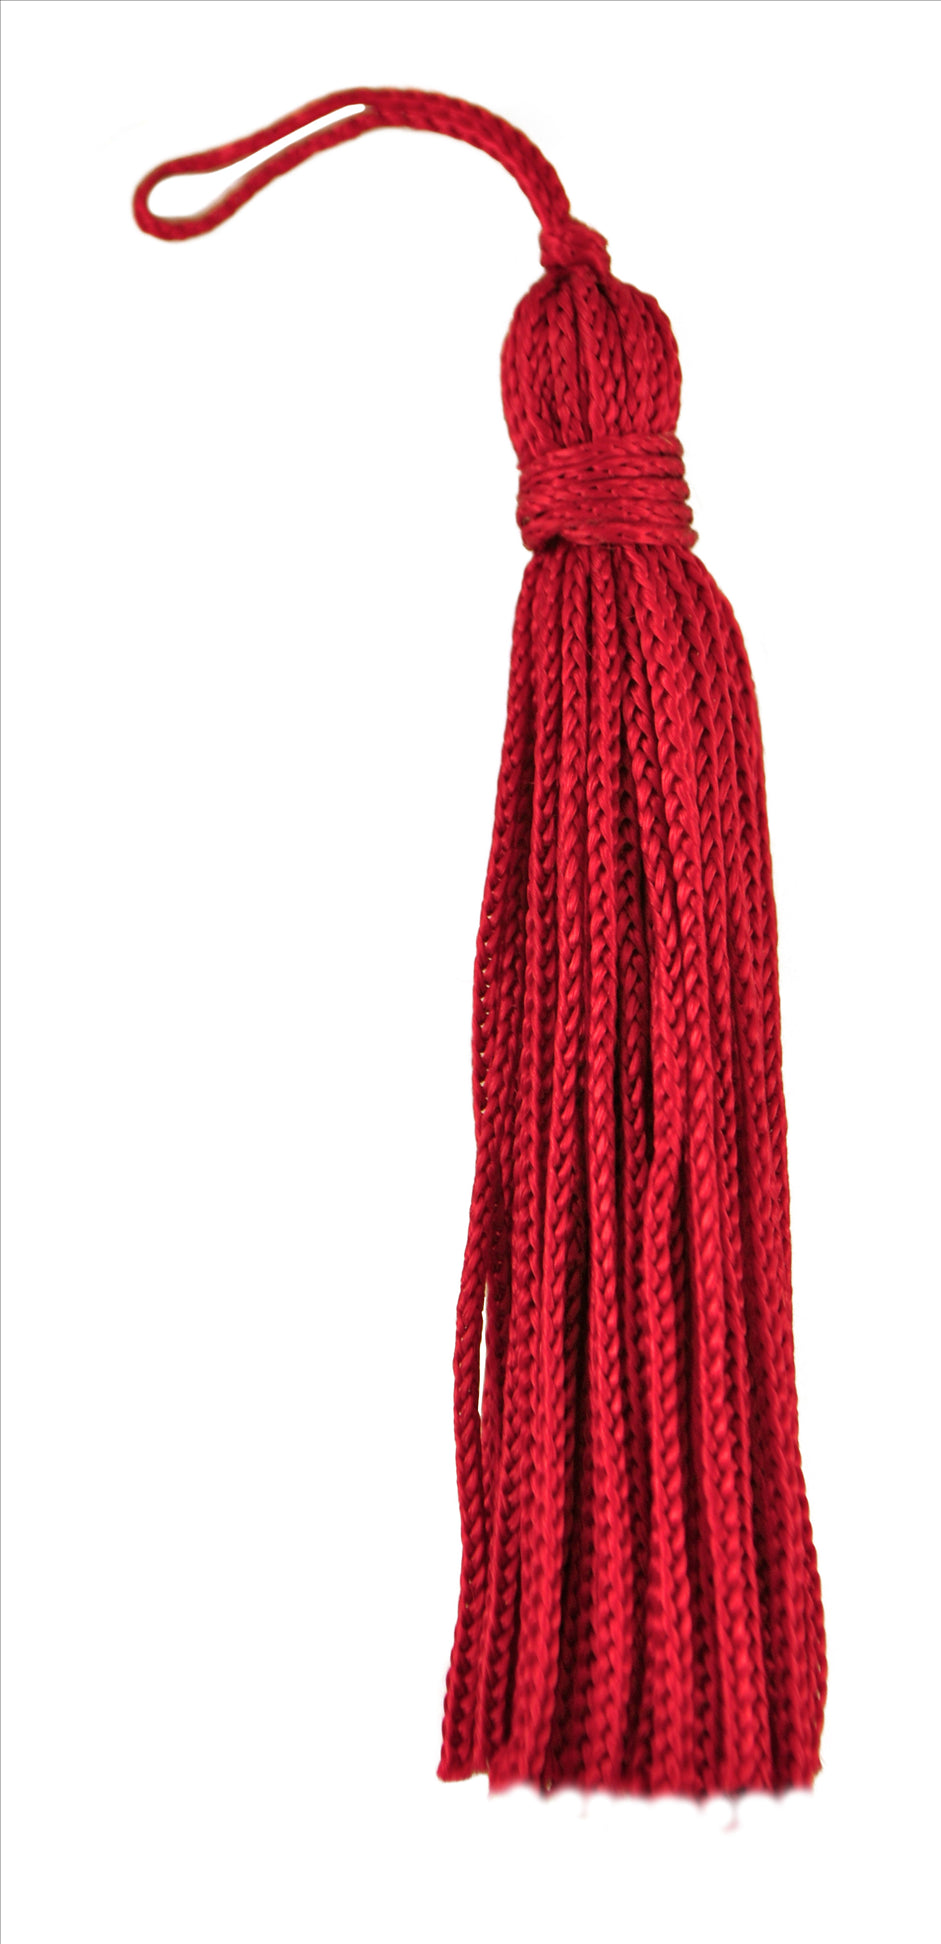 Colorful Cotton Tassel,Red Tassel,Cheap Tassels - Buy Cotton Tassel,Red  Tassel,Small Tassels Product on